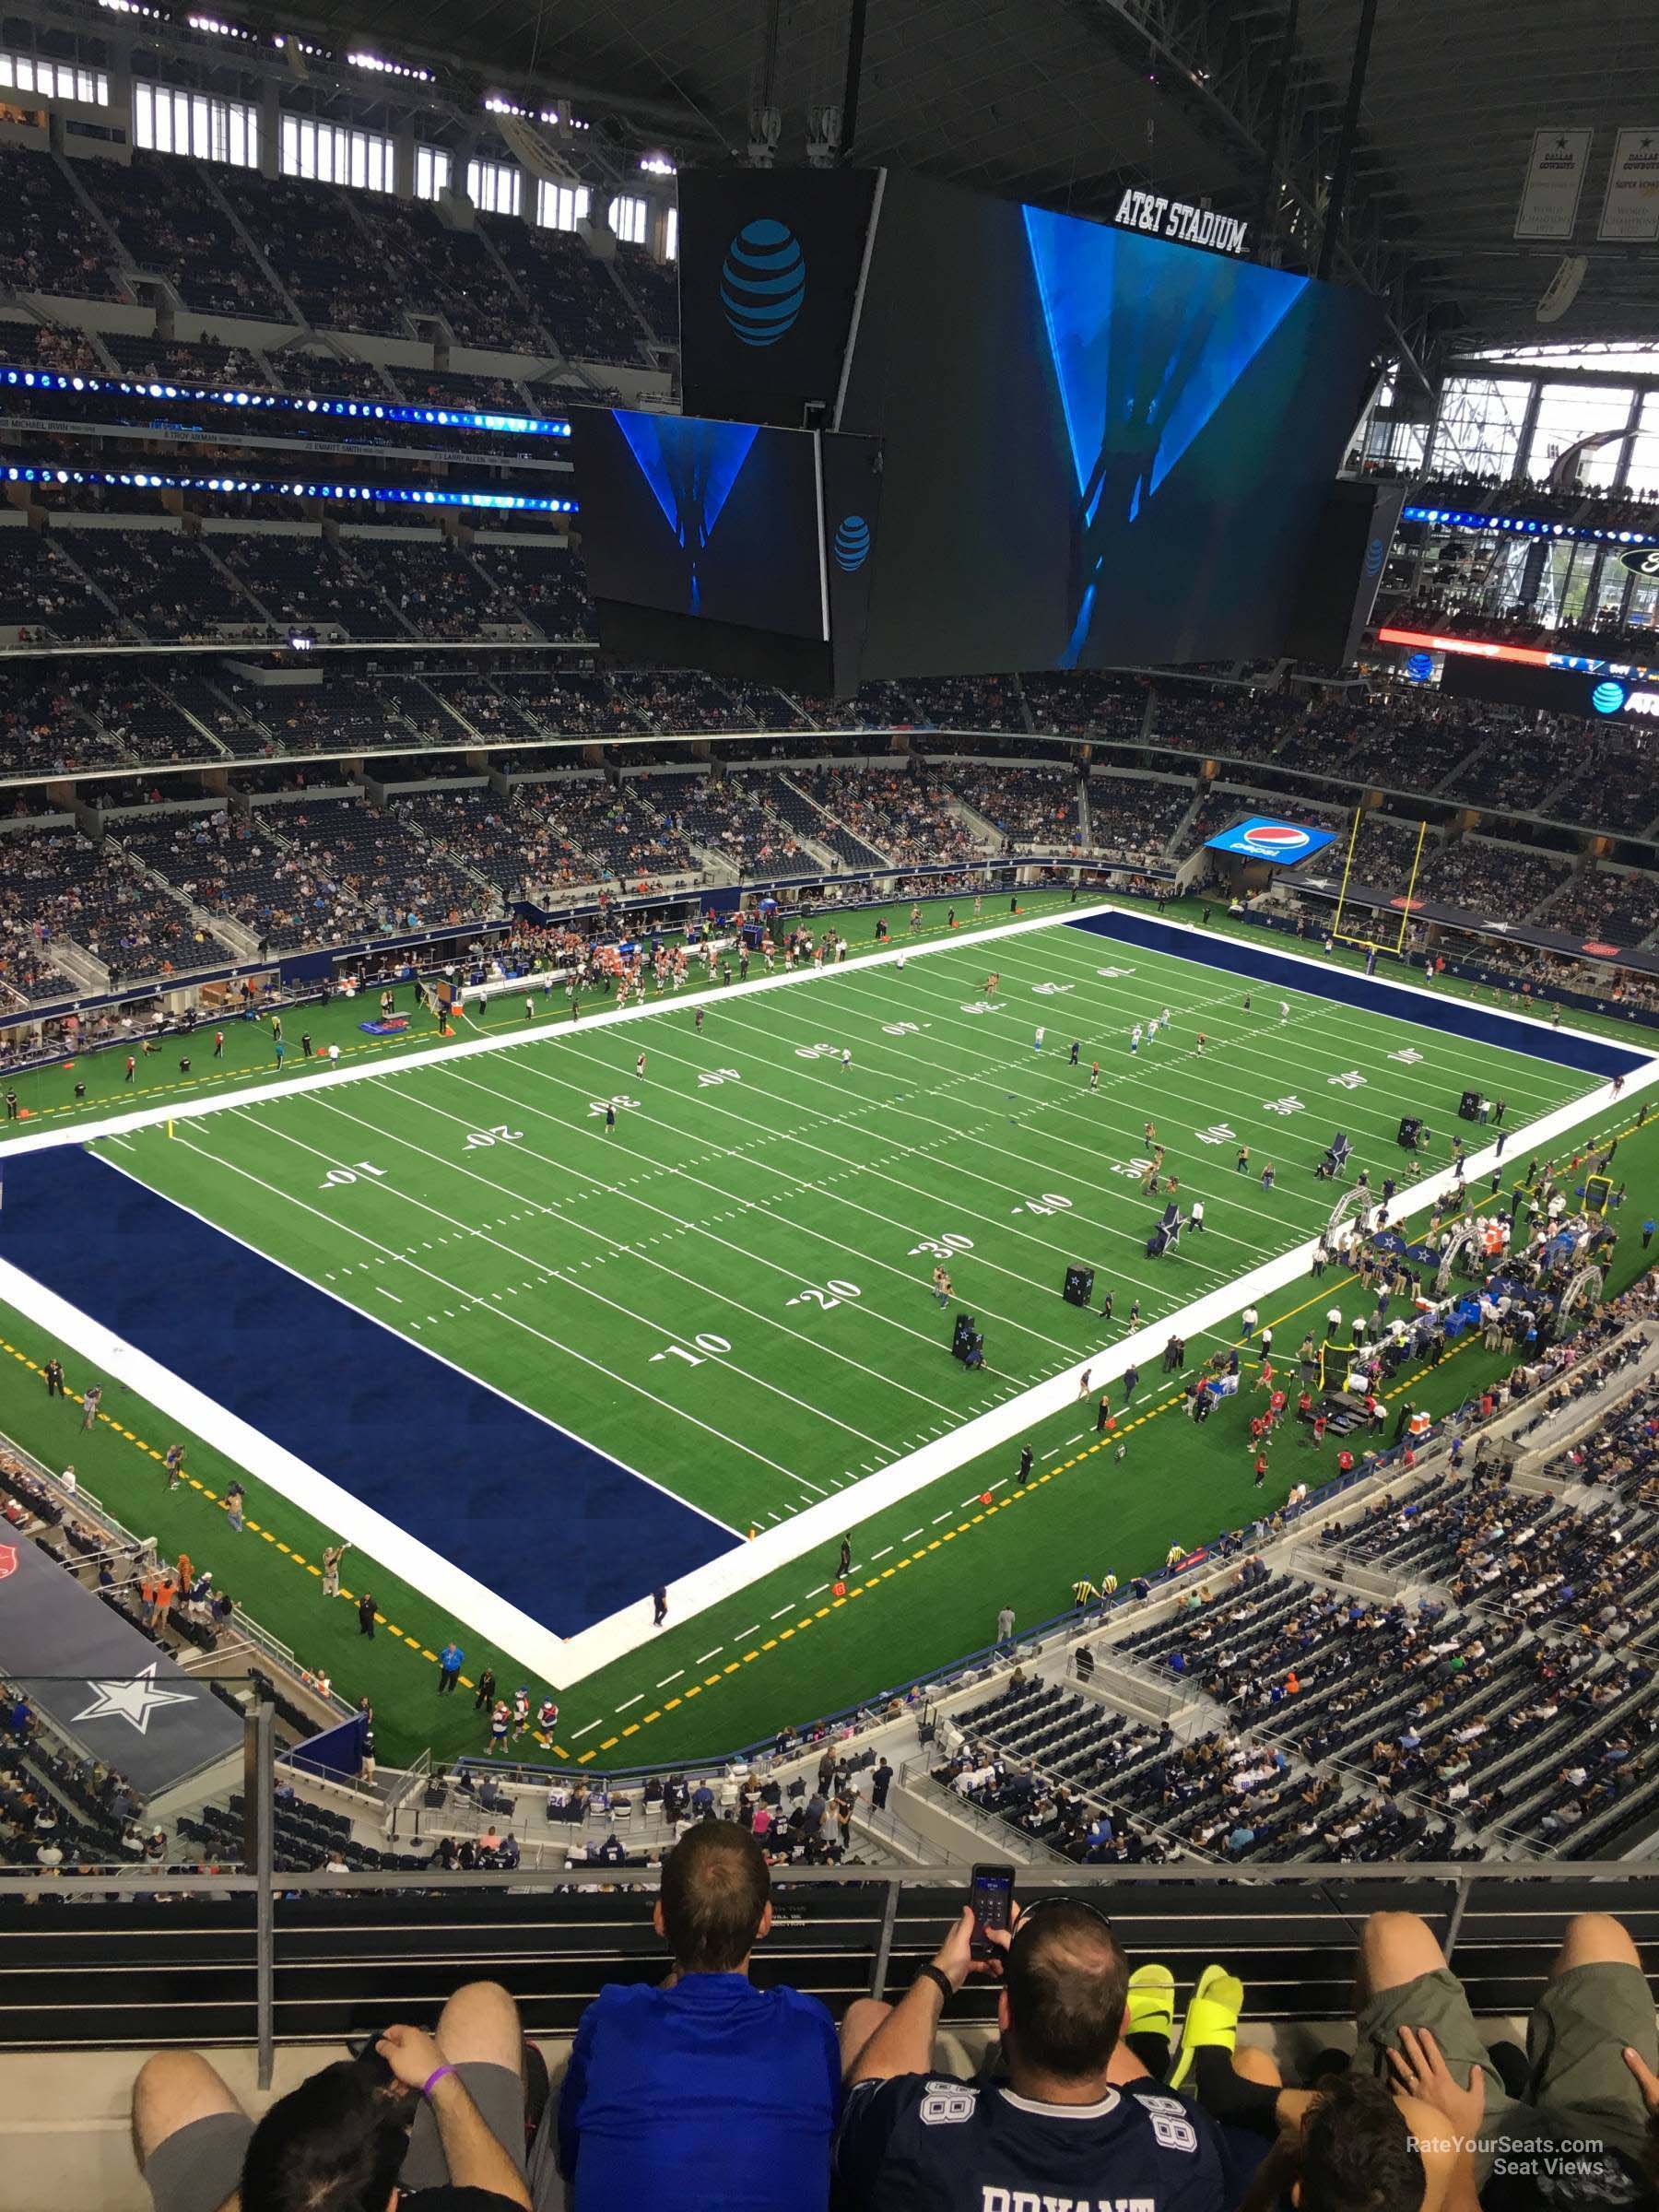 section 422, row 4 seat view  for football - at&t stadium (cowboys stadium)